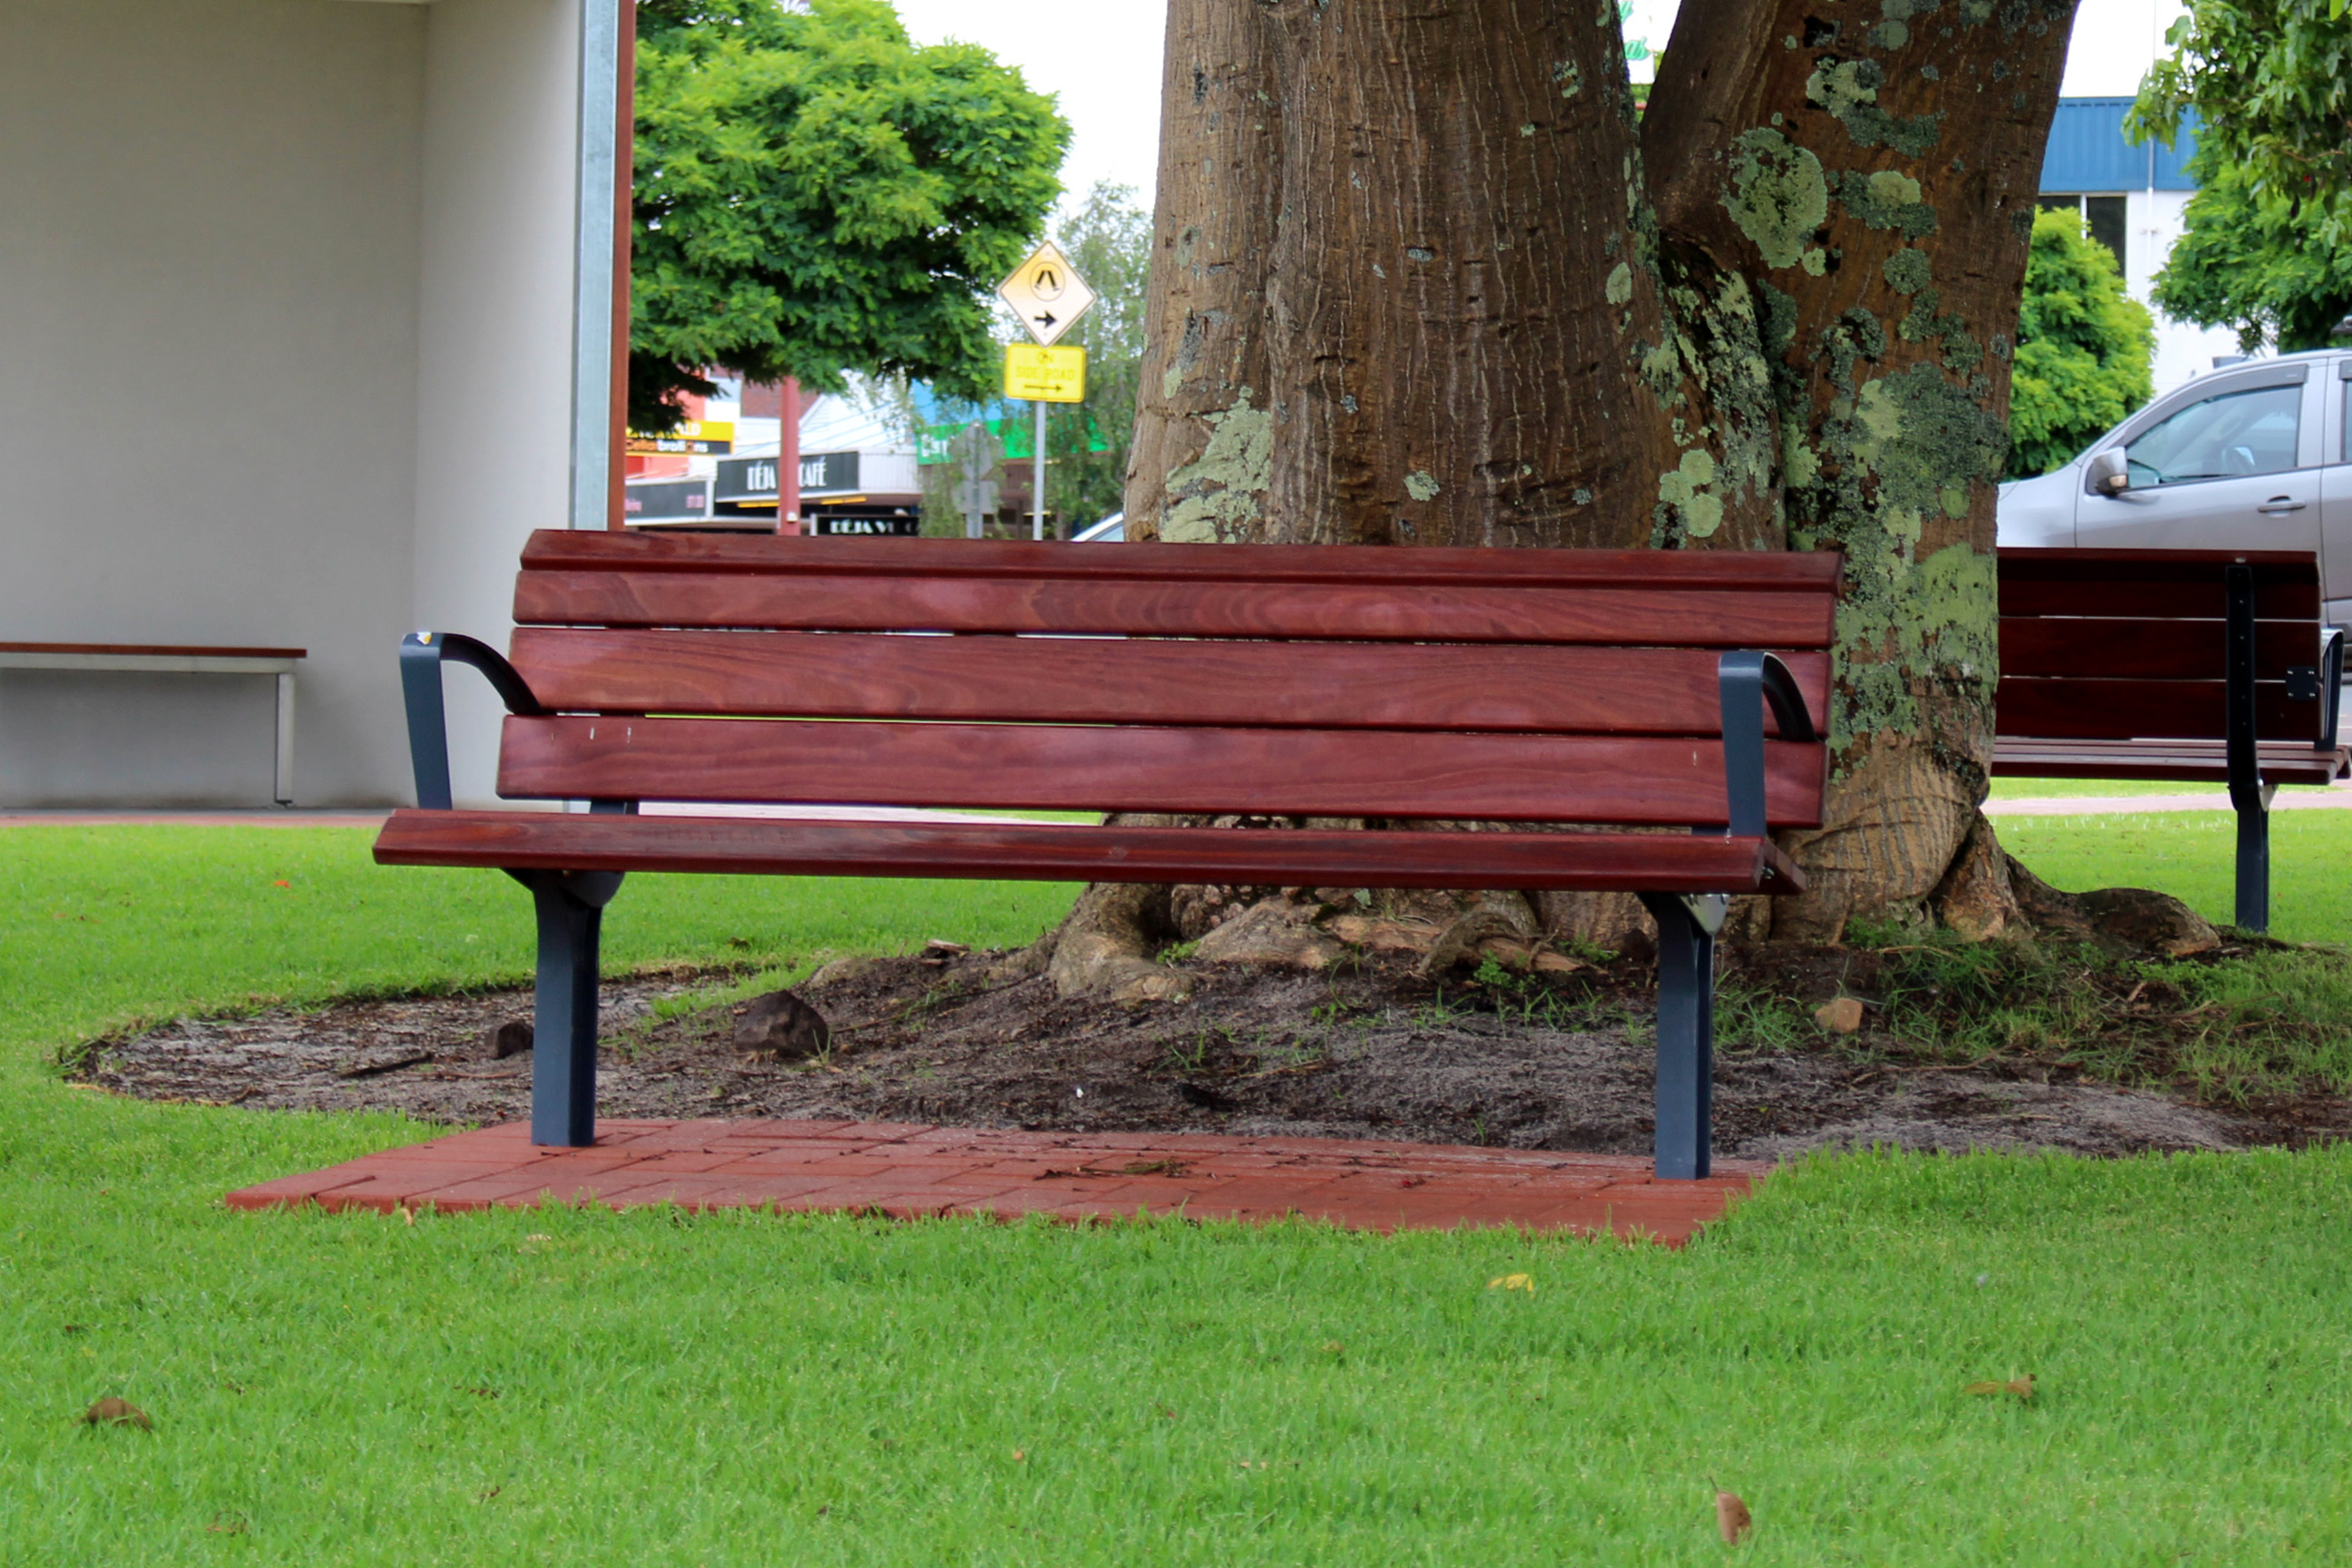 New bench seating in Coronation Park